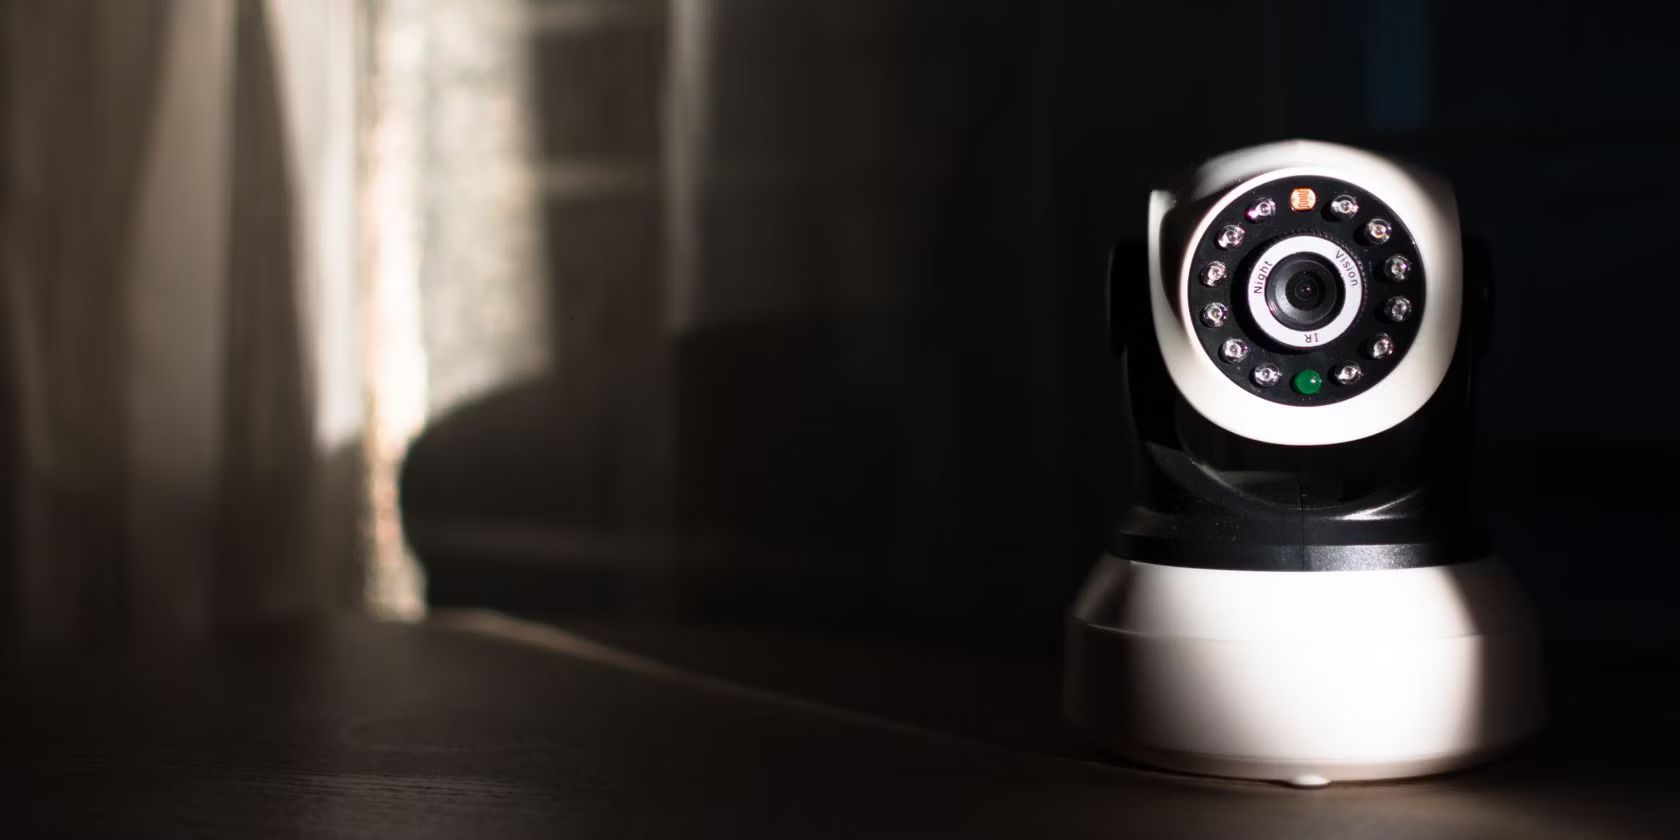 How To Use My Webcam For Home Surveillance